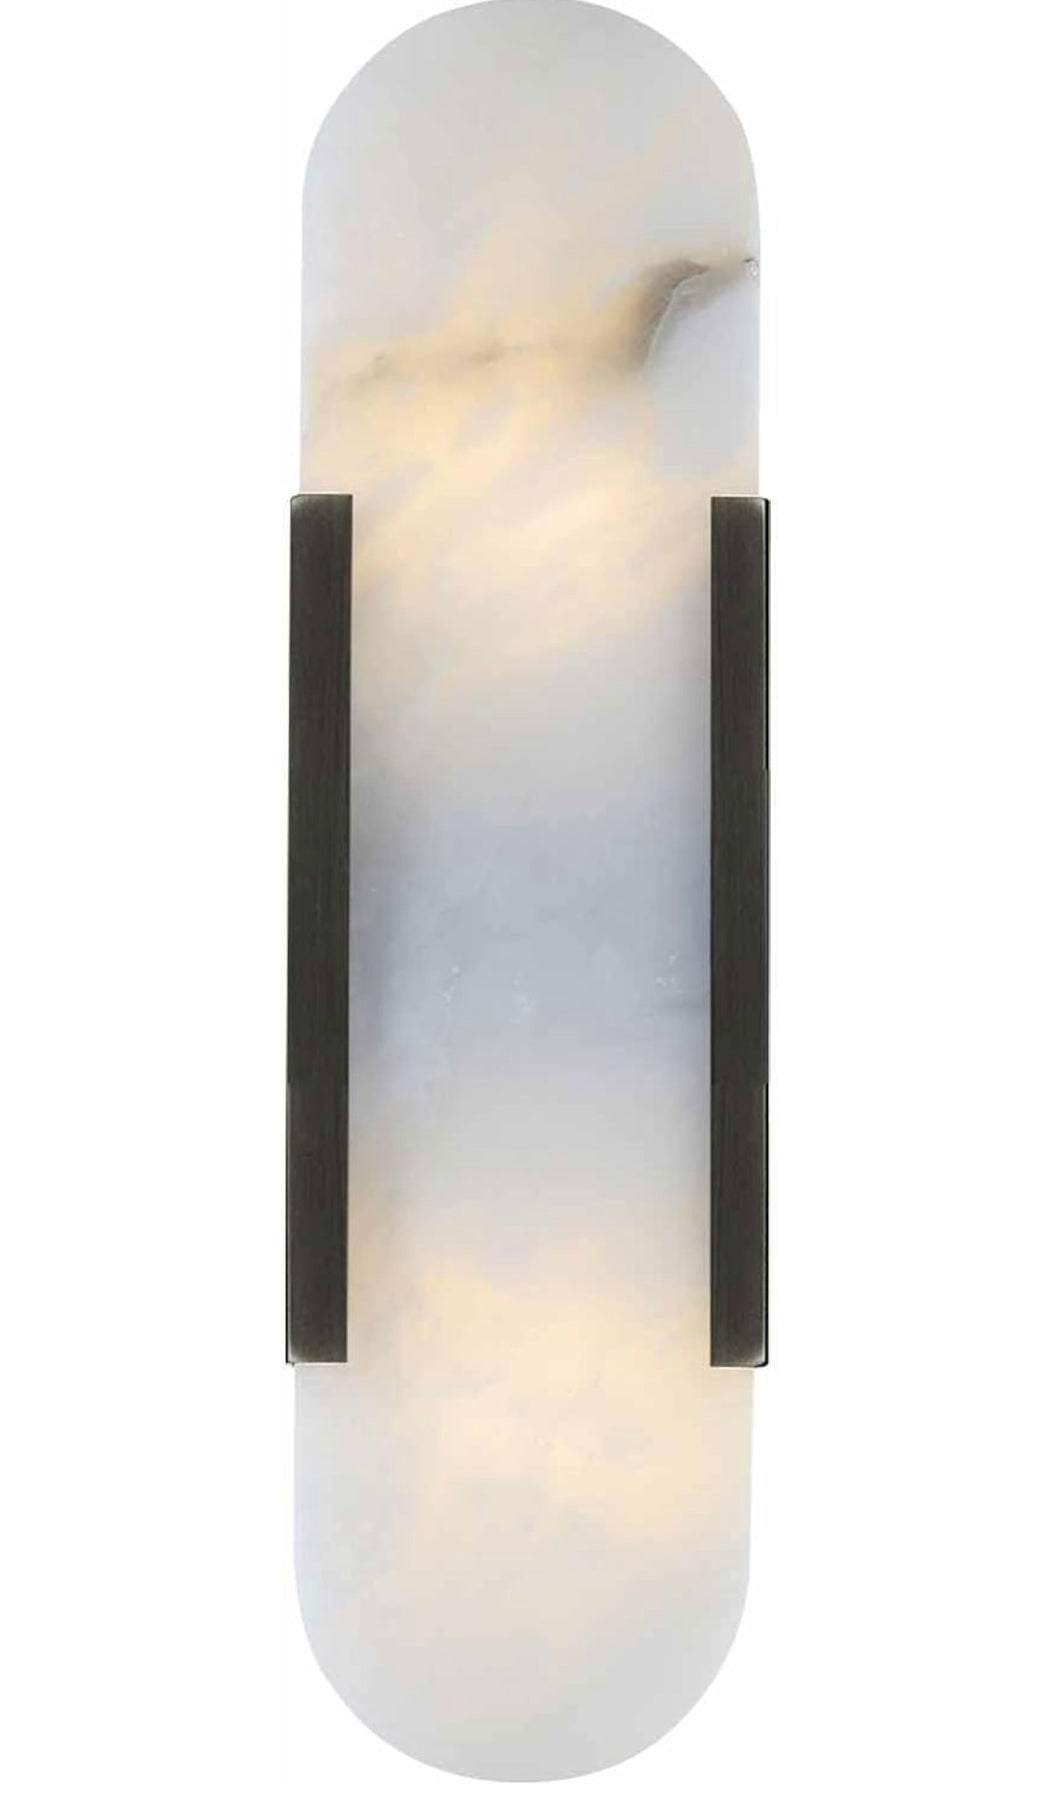 Oval Marble Sconce in Black